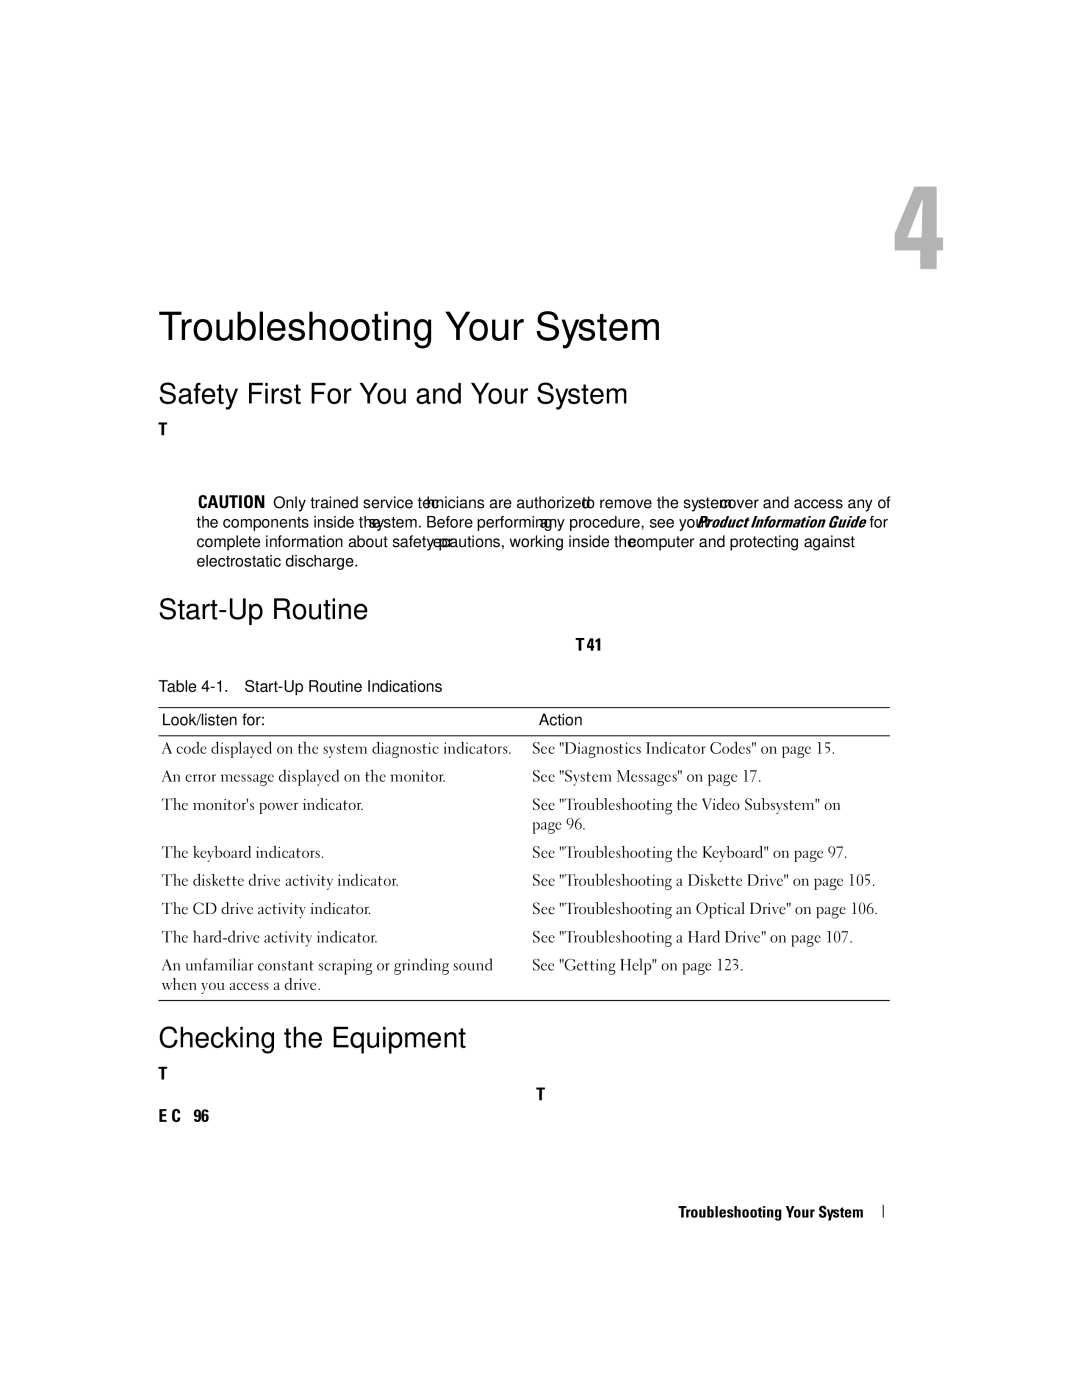 Dell SC1430 owner manual Safety First-For You and Your System, Start-Up Routine, Checking the Equipment 